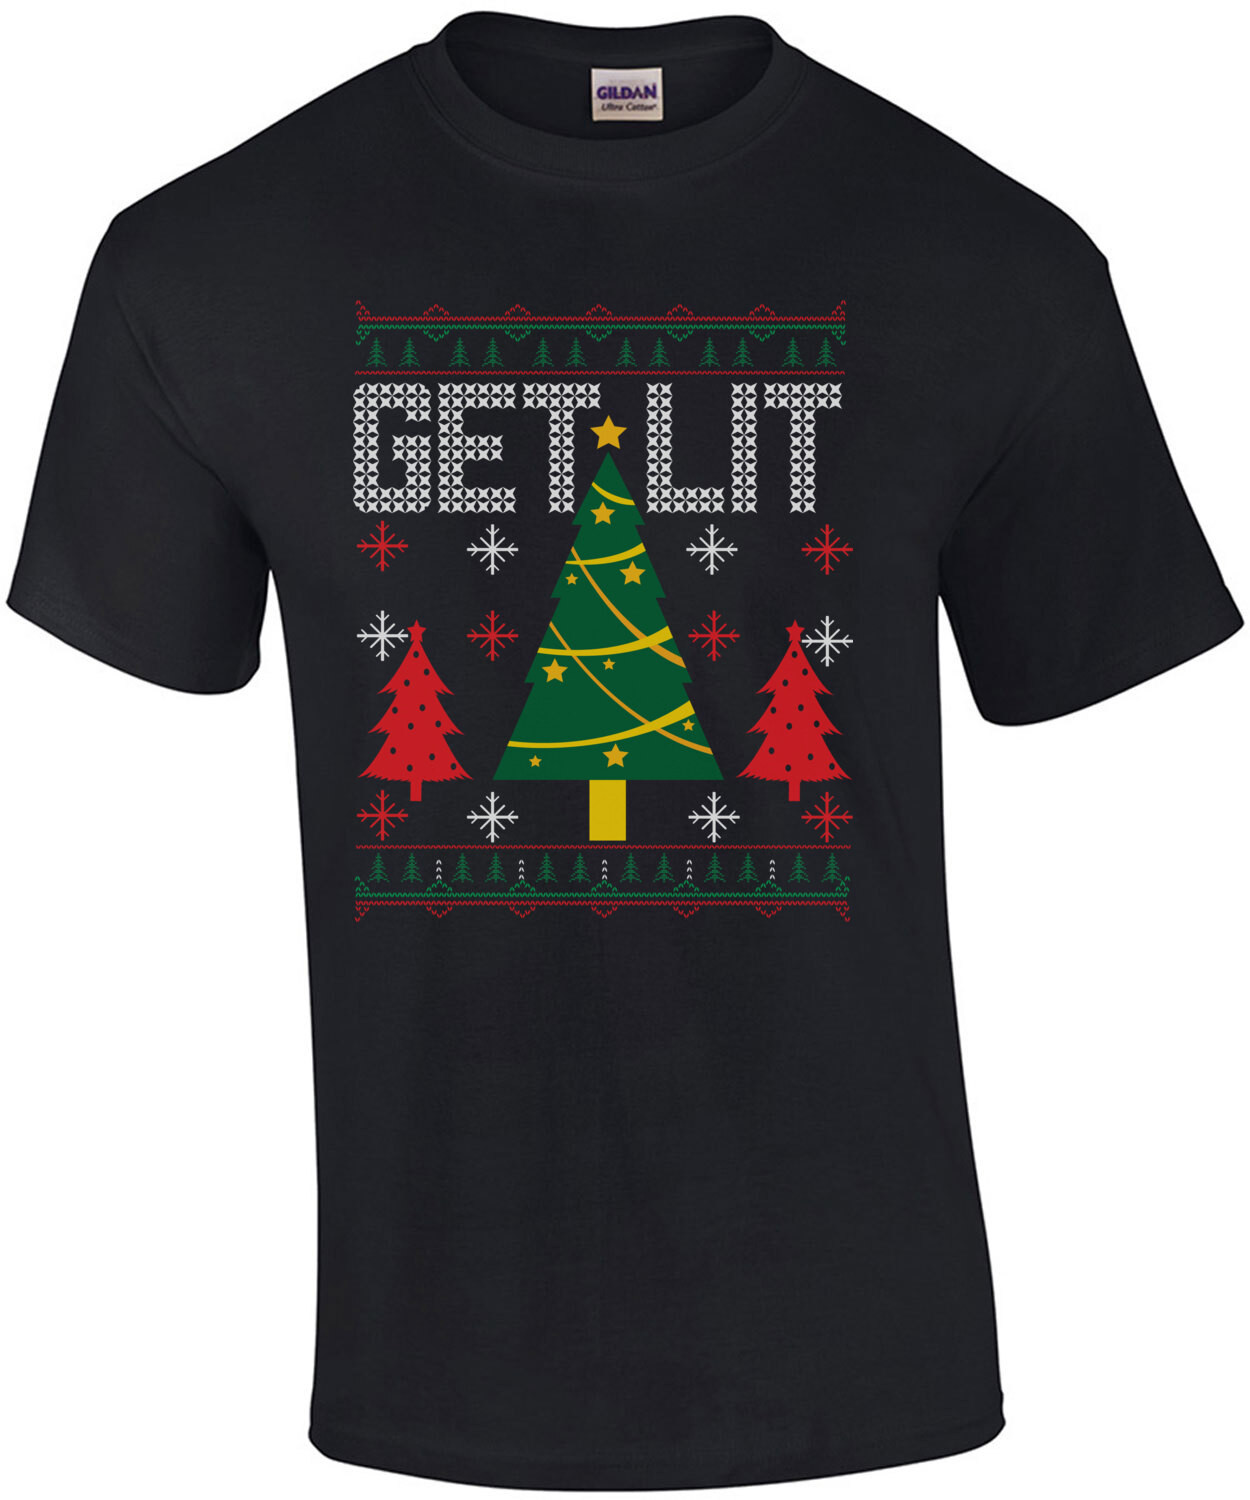 Get Lit Ugly Christmas Sweater